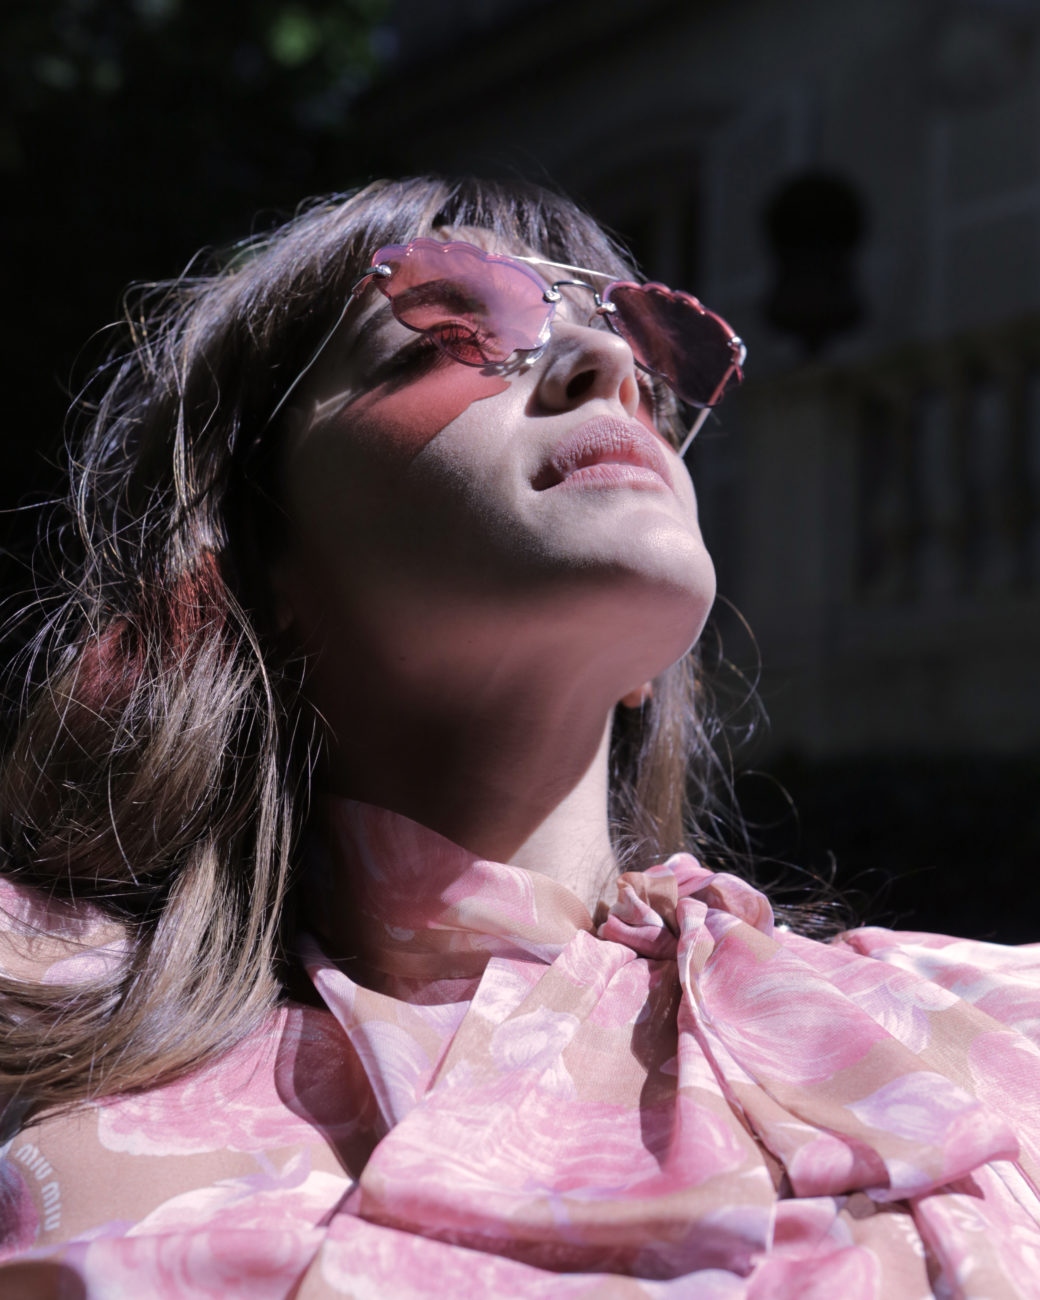 Miu Miu Eyewear Campaign, "Head in the Clouds" written and directed by Agostina Gálvez